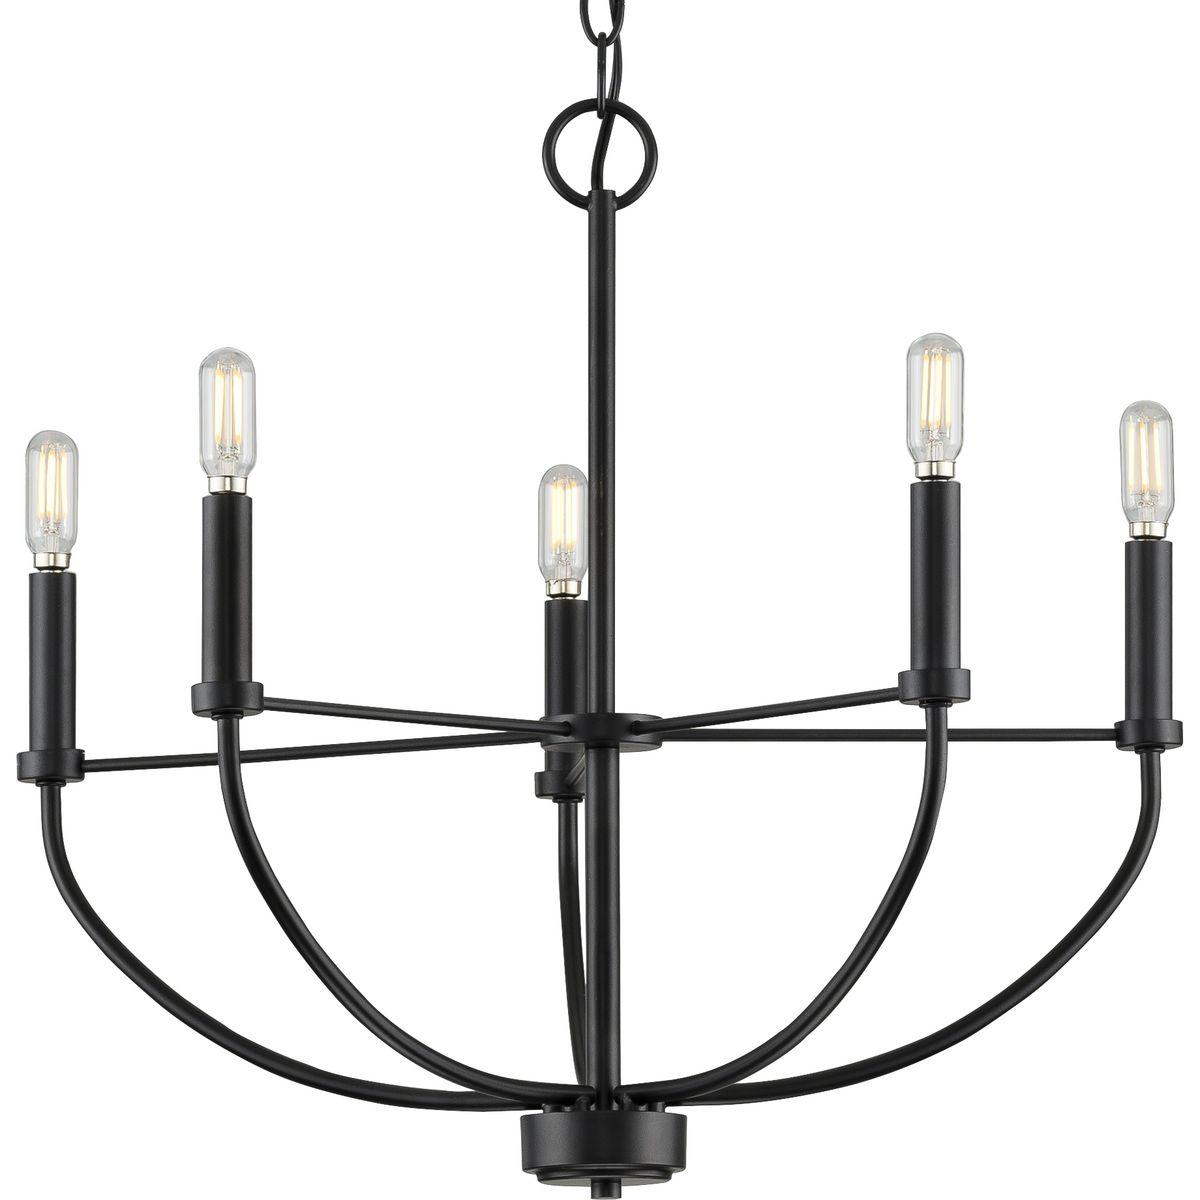 Hubbell P400202-031 Transform your home with the gorgeous glow from the Leyden Collection 5-Light Matte Black Farmhouse Chandelier. Light sources glow from atop light bases reminiscent of antique candlesticks arranged in a circular design for an elegant charming glow sure to